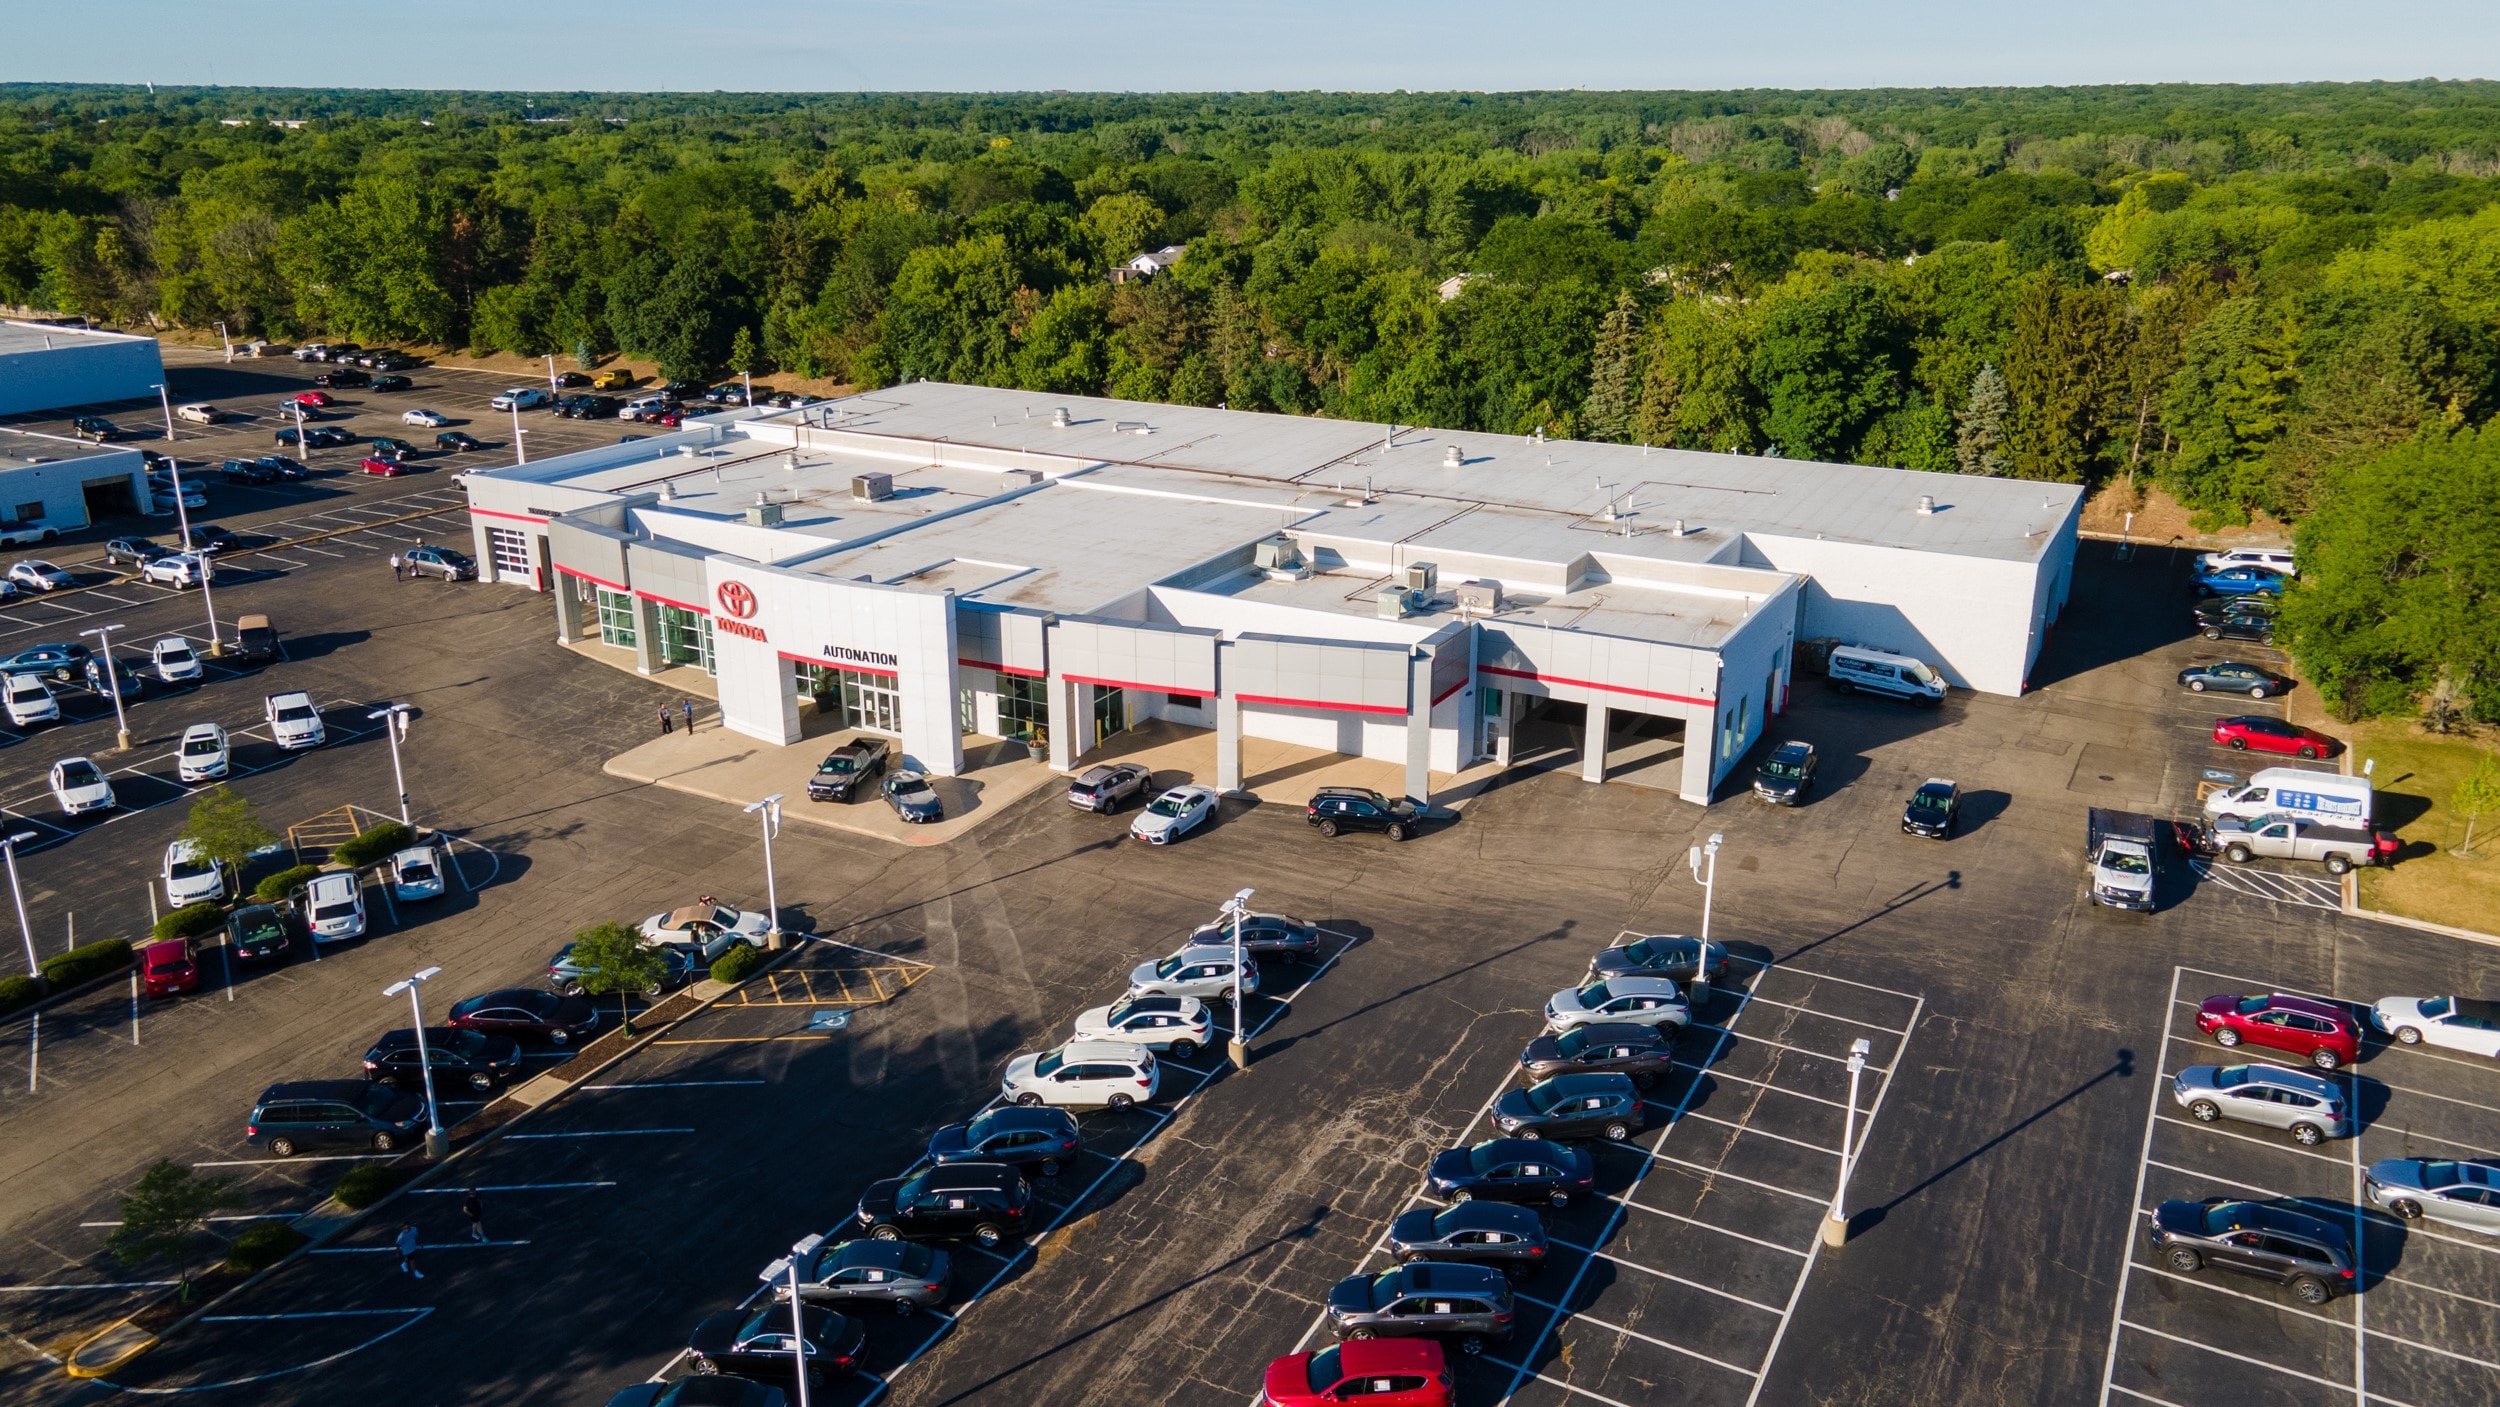 Overhead exterior view of AutoNation Toyota Libertyville. The building is grey and white and has some large windows. Many vehicles can be seen parked near the building, which is in a forested area.